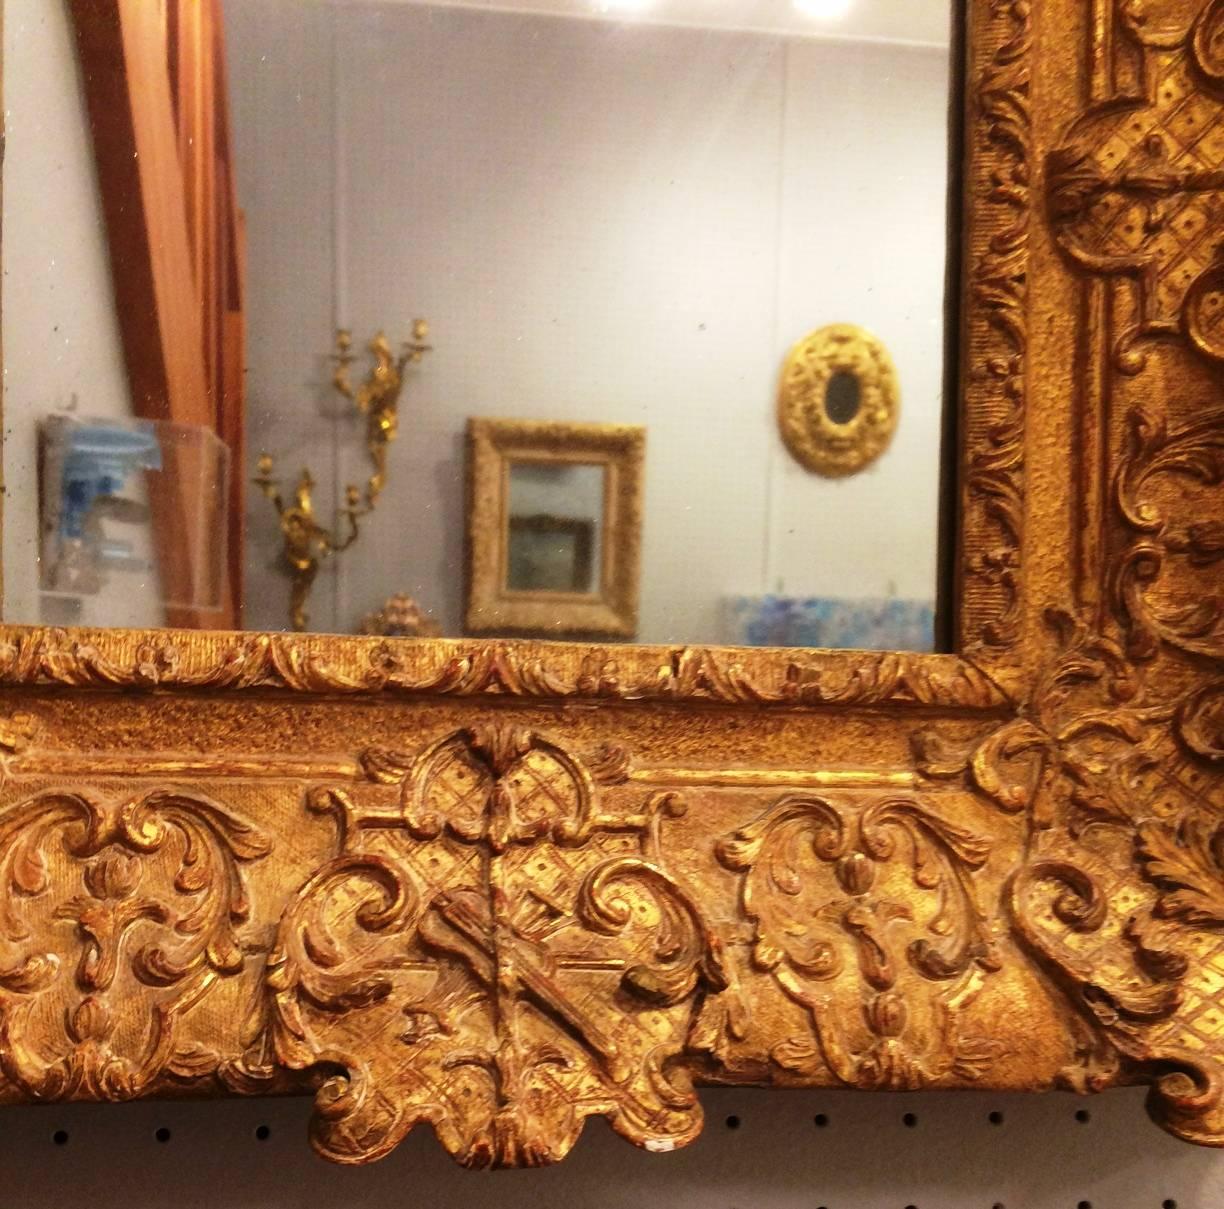 Carved Fabulous Louis XIV Period Frame Mounted as Mirror, France, Early 18th Century